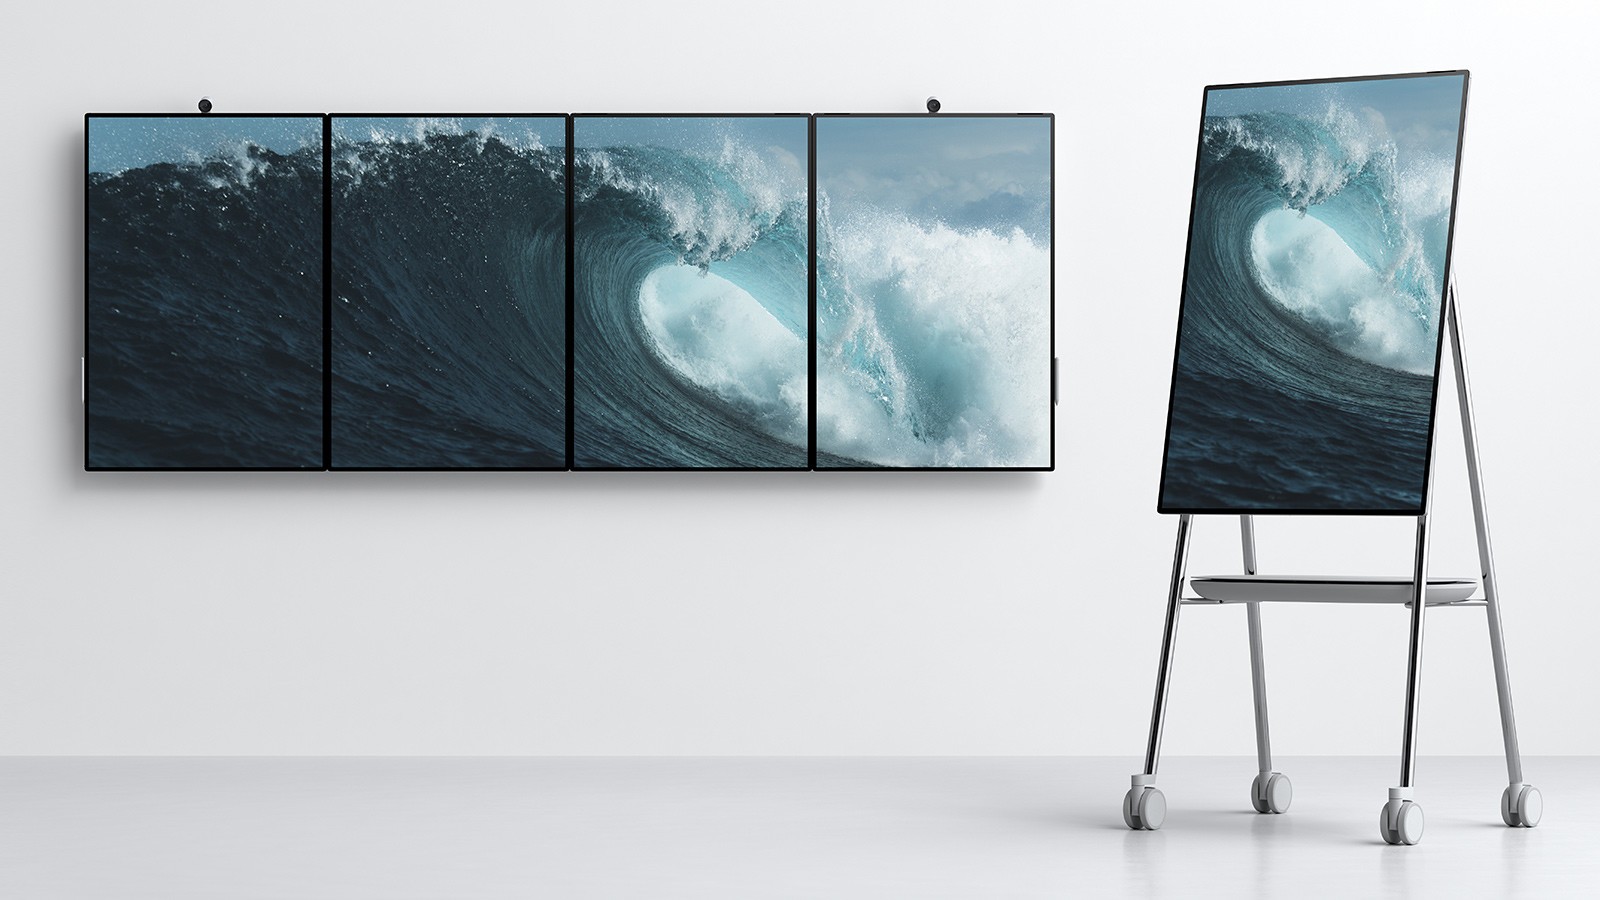 Surface Hub 2 Will Feature A Modular Design, Upgradable - Microsoft Surface Hub 2 Price , HD Wallpaper & Backgrounds